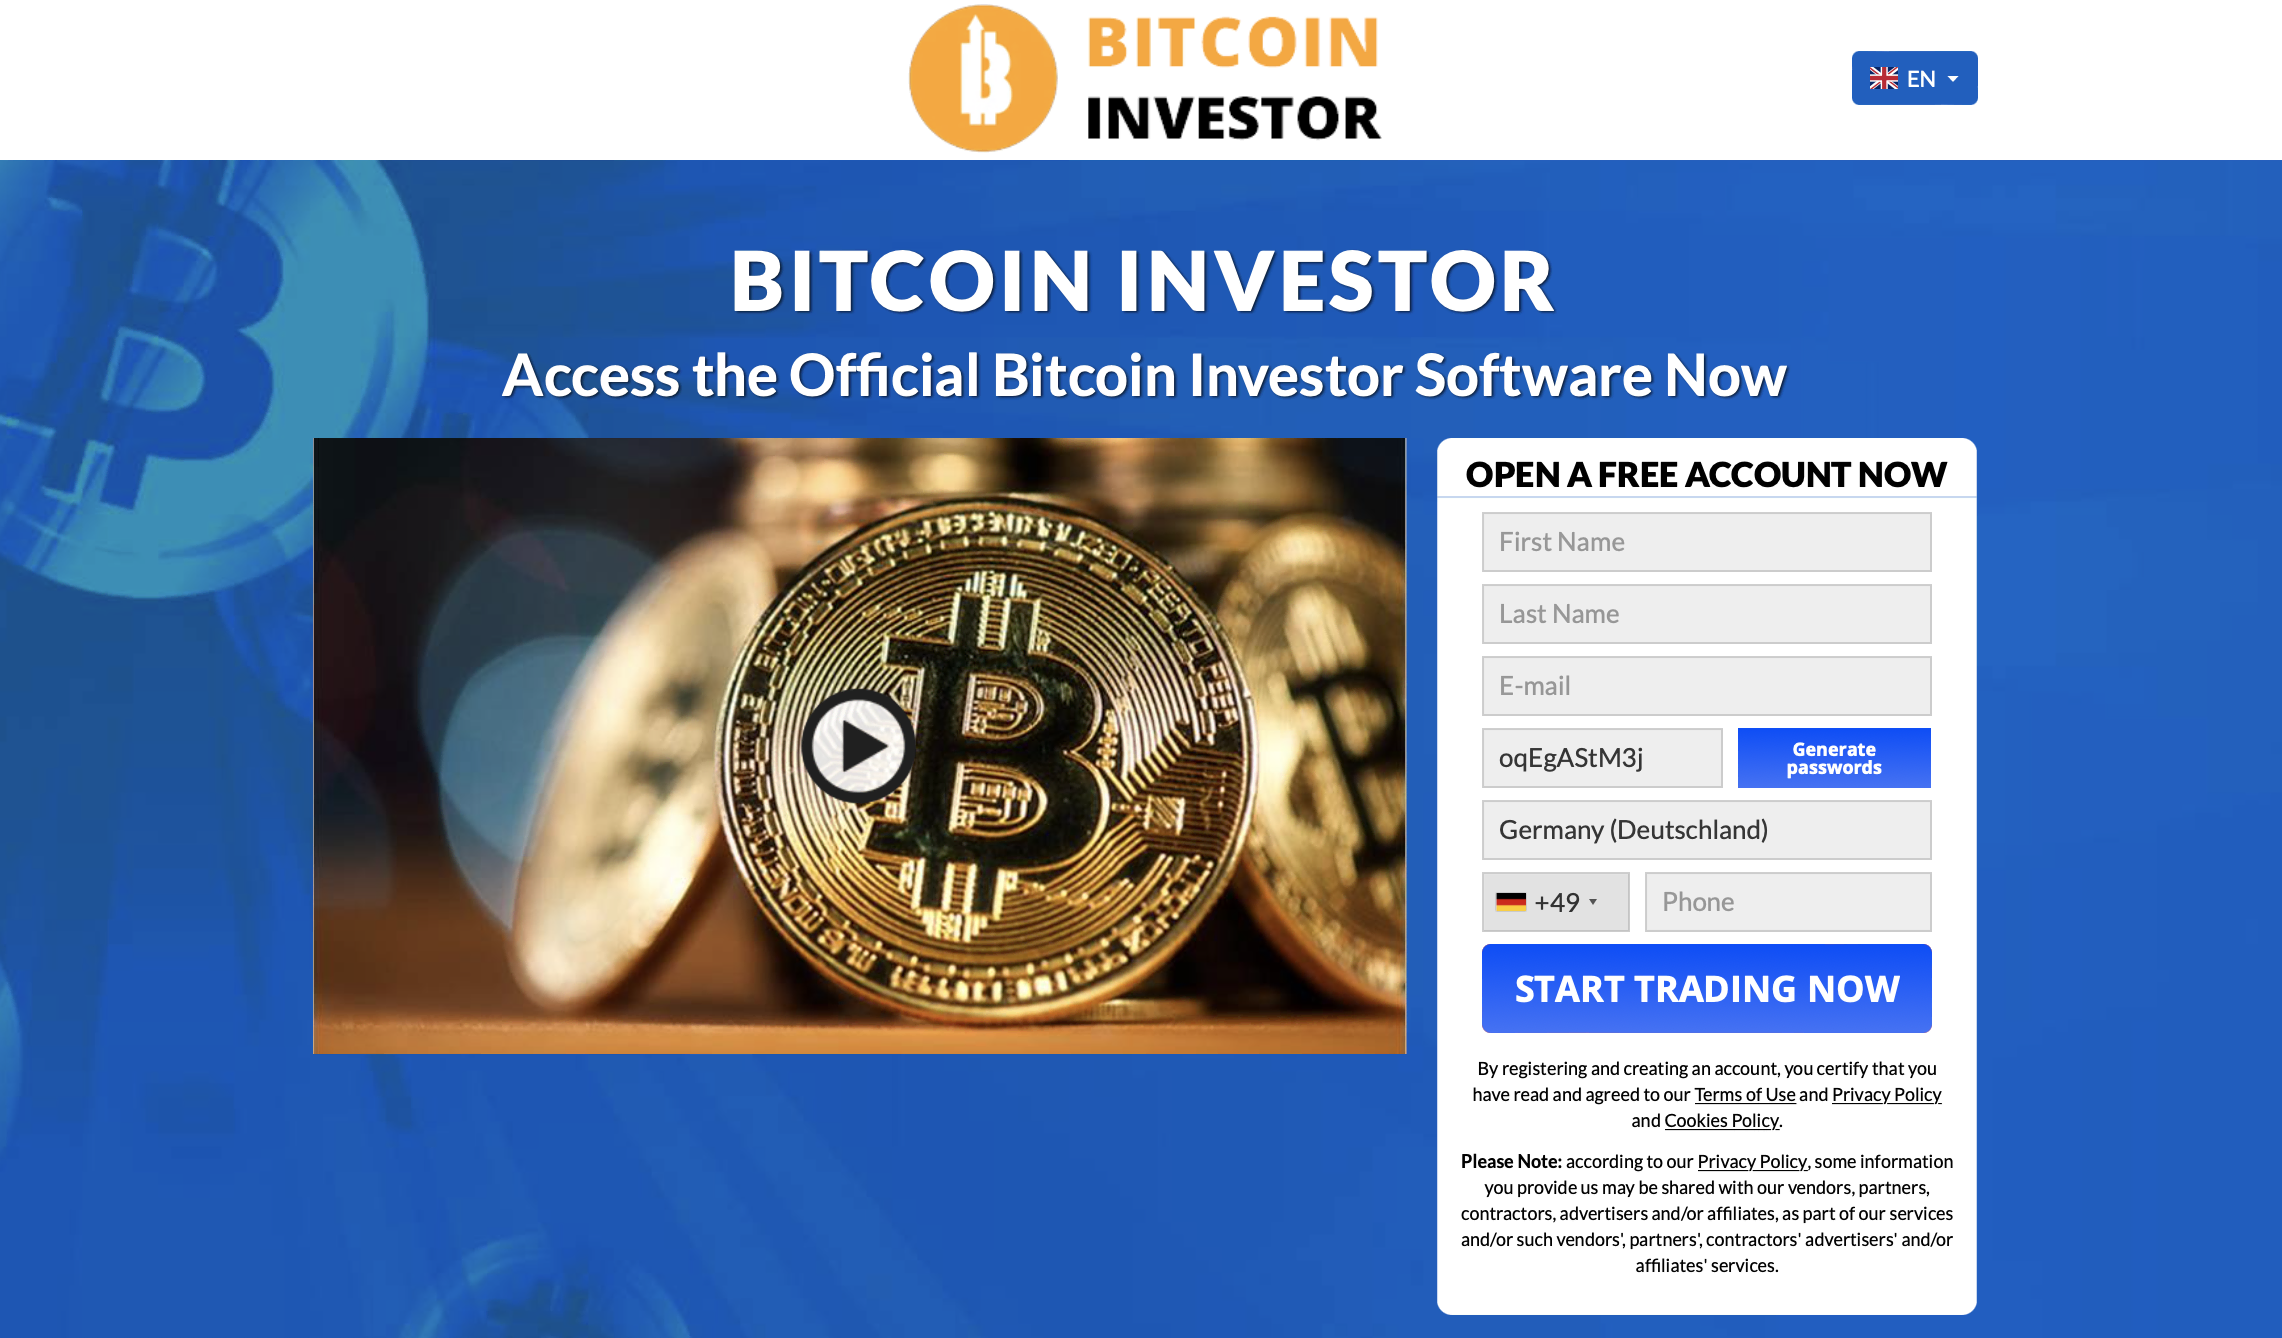 The official website of Bitcoin Investor